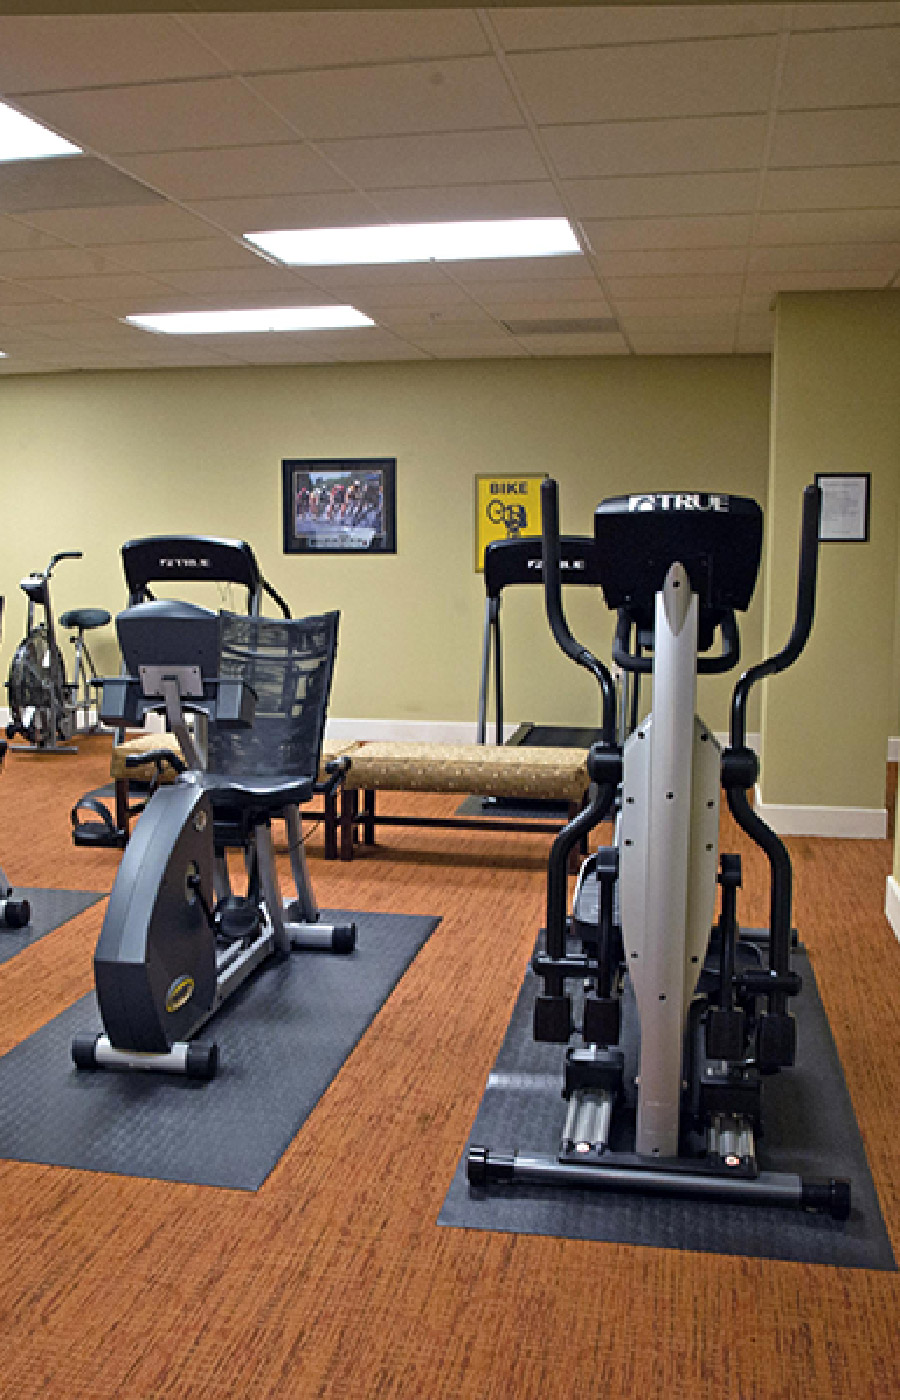 The fitness center.